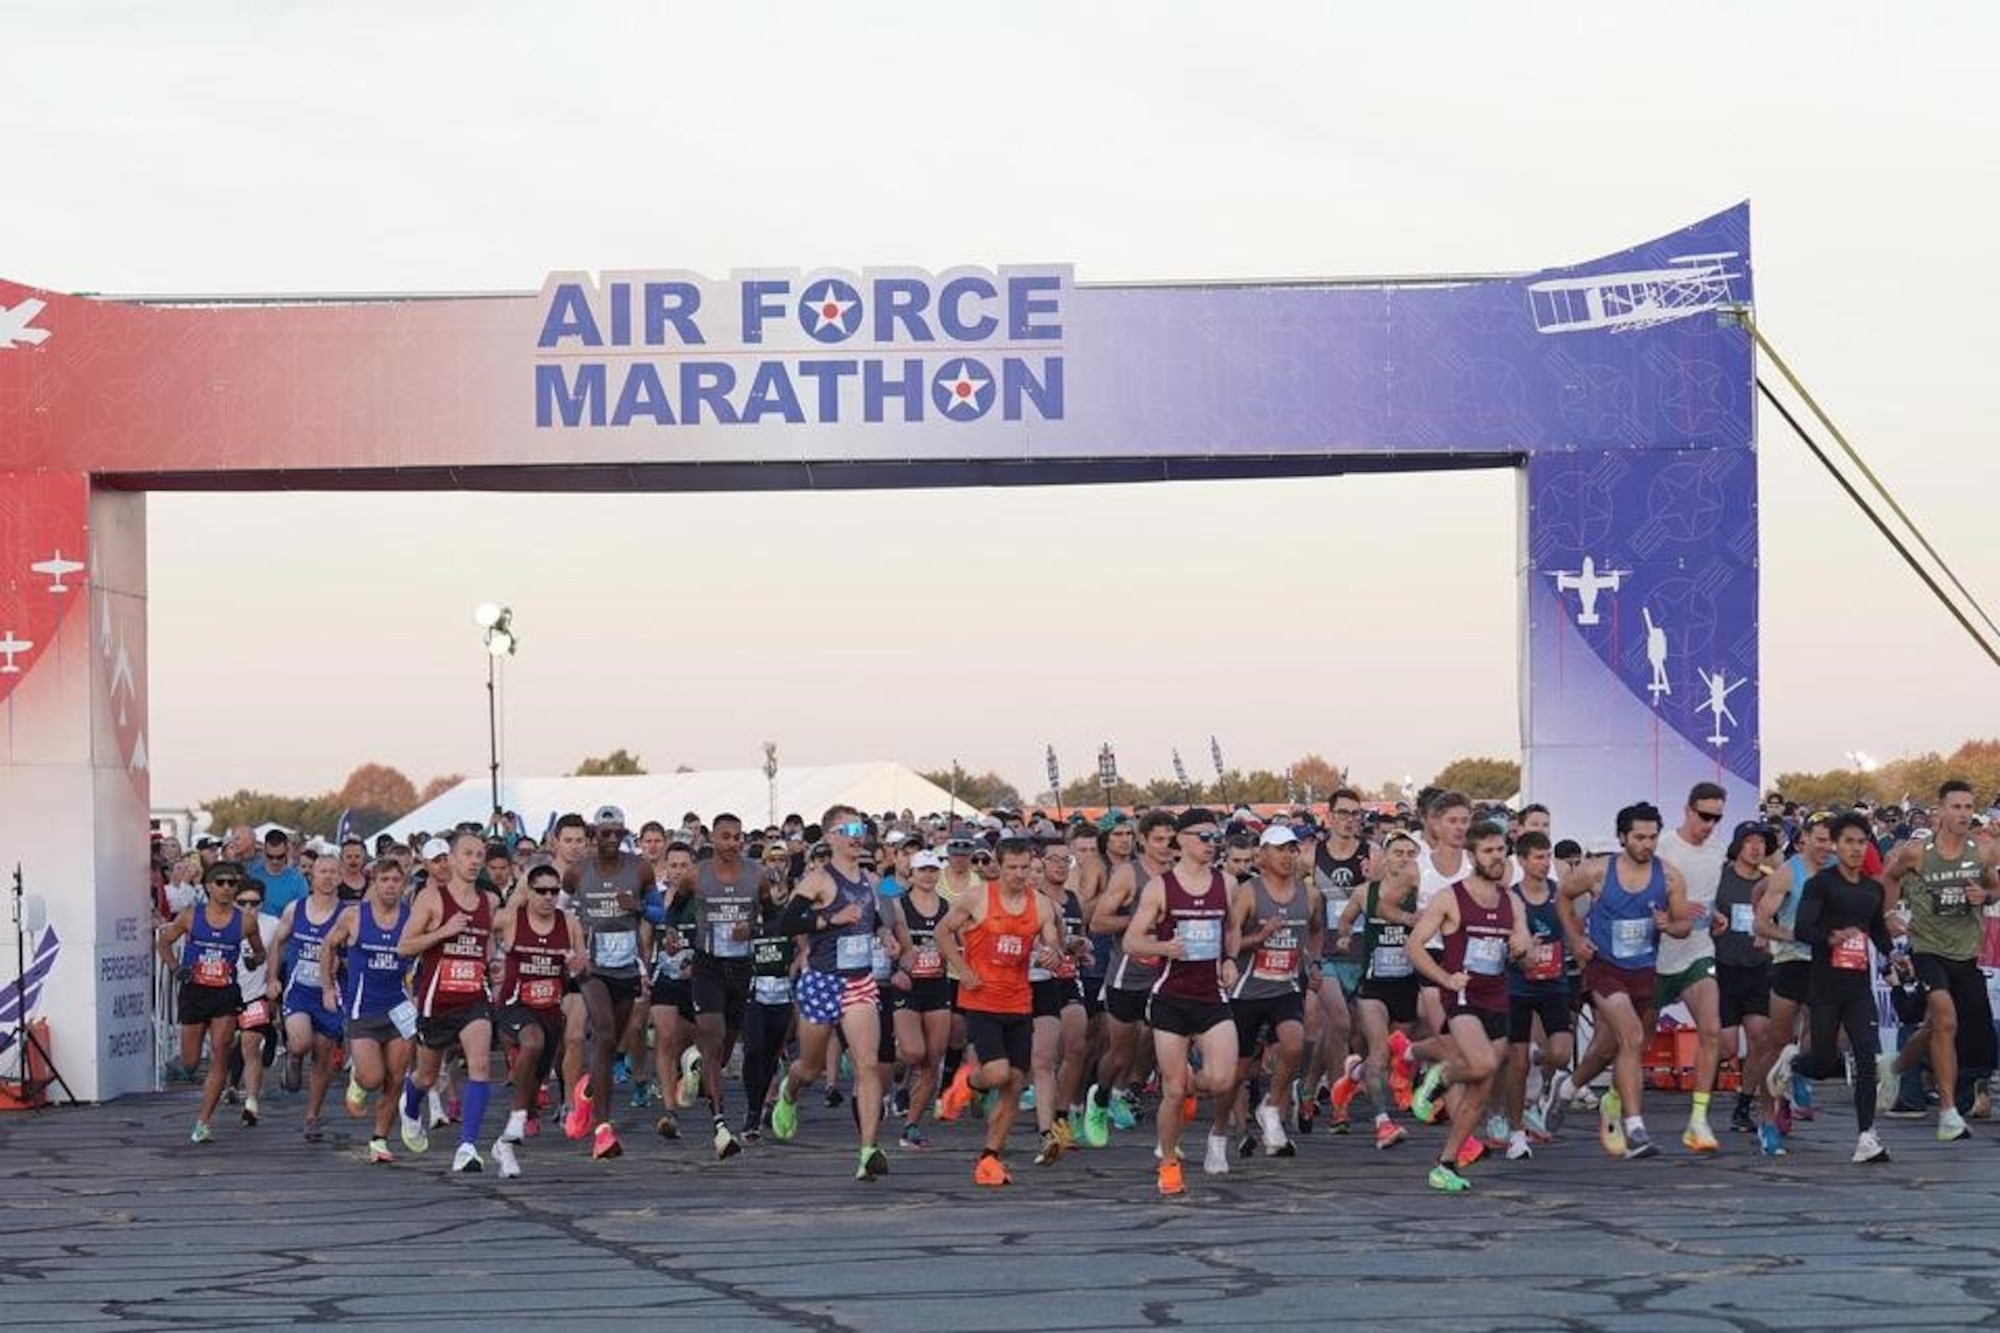 People running during the Air Force Marathon